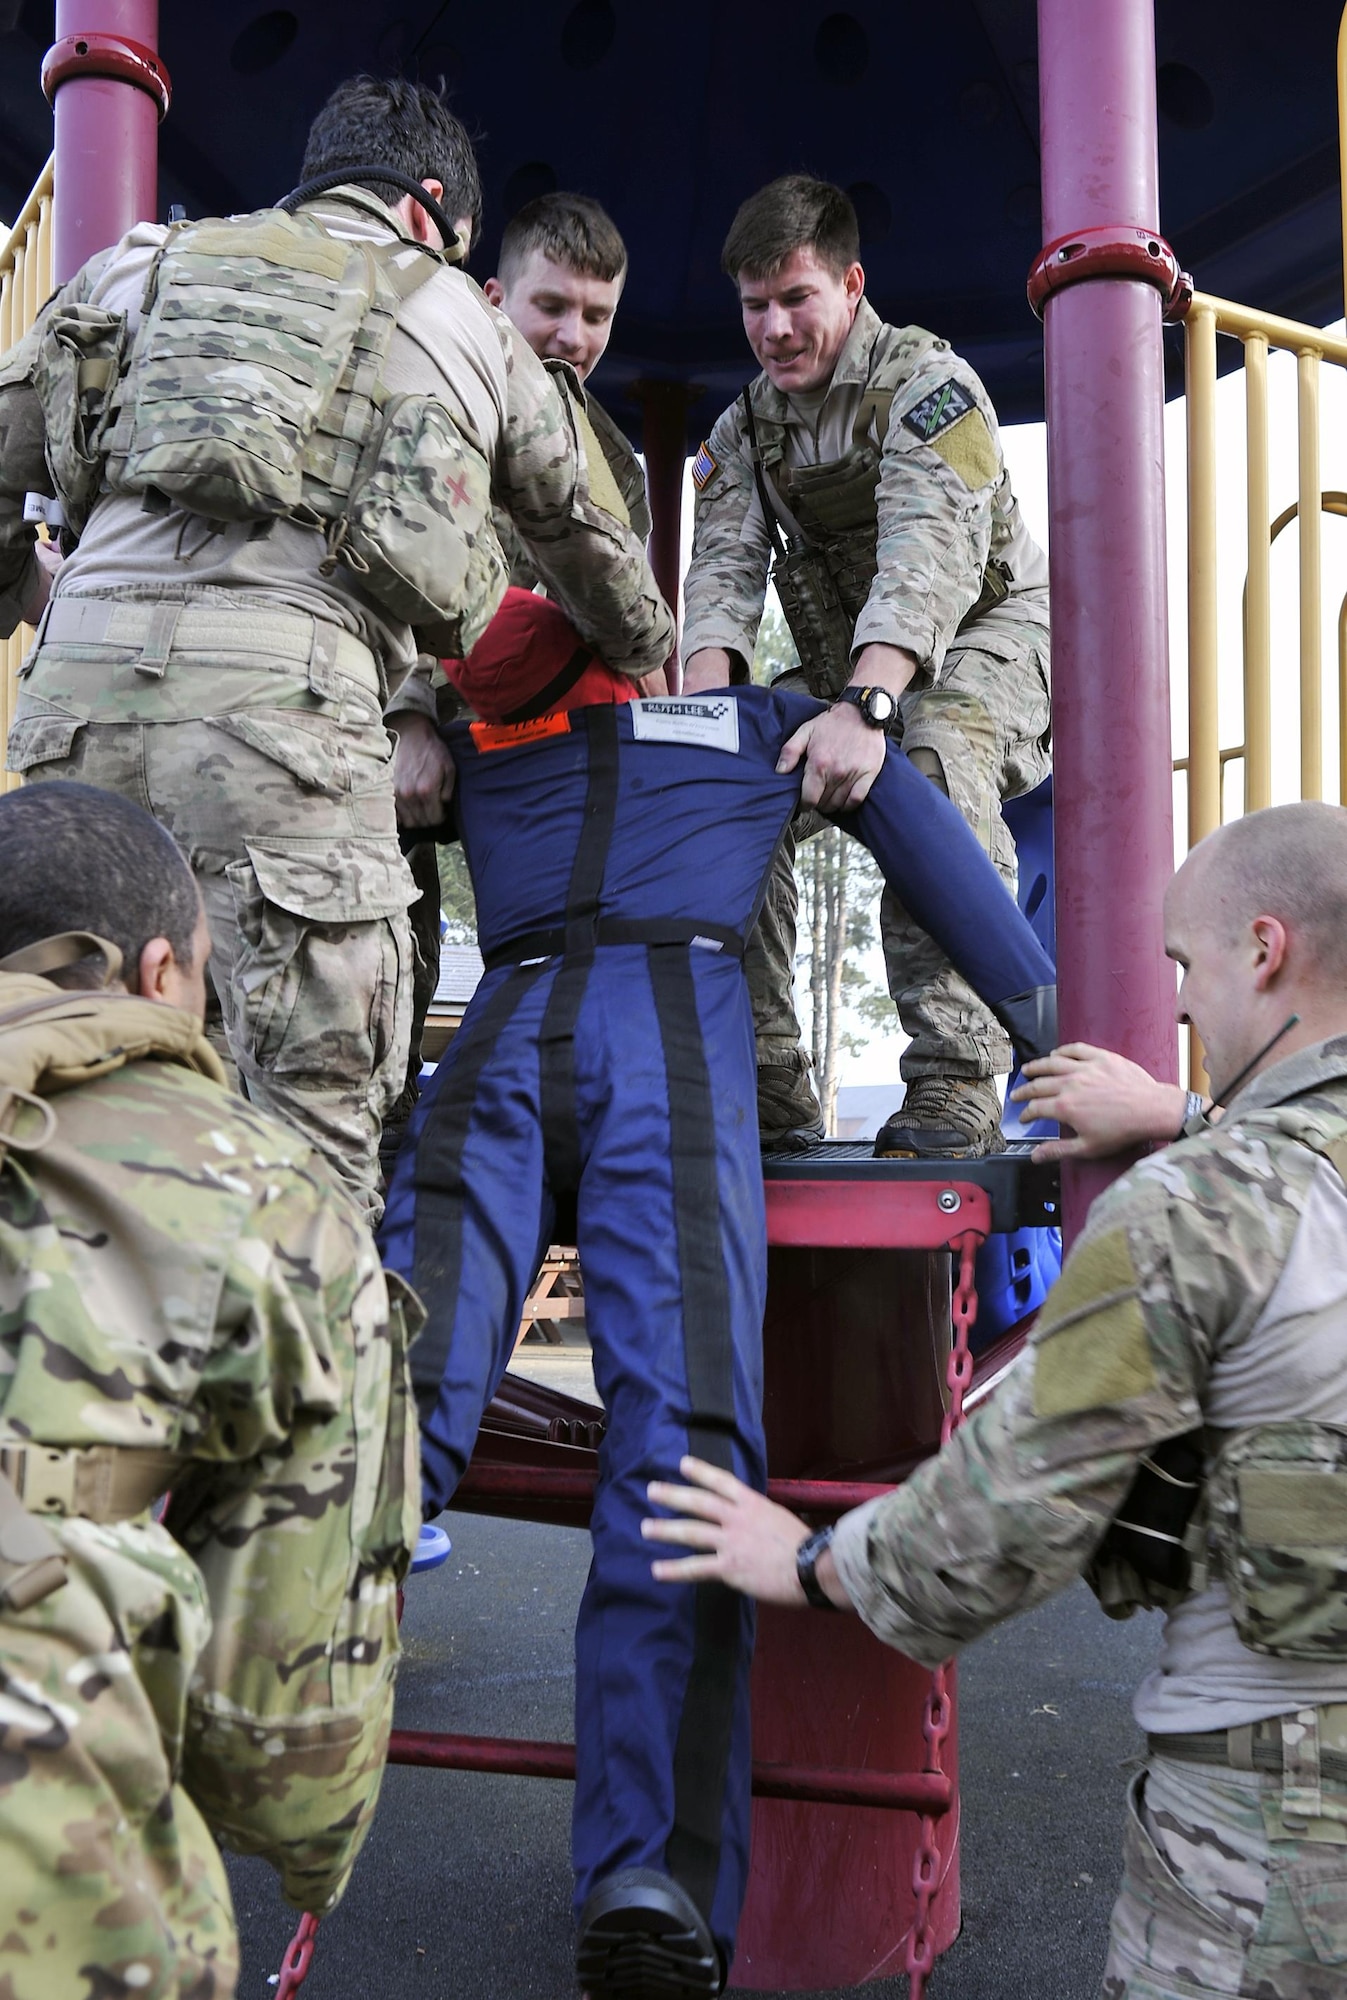 Members of the 321st Special Tactics Squadron assist their teammates in lifting Mr. Hurt, a dummy, during the Monster Mash April 10, 2015, on RAF Mildenhall, England. The Monster Mash is an event composed of a variety of team building challenges, created to prepare Airmen for real-life scenarios. (U.S. Air Force photo by Airman 1st Class Kyla Gifford)